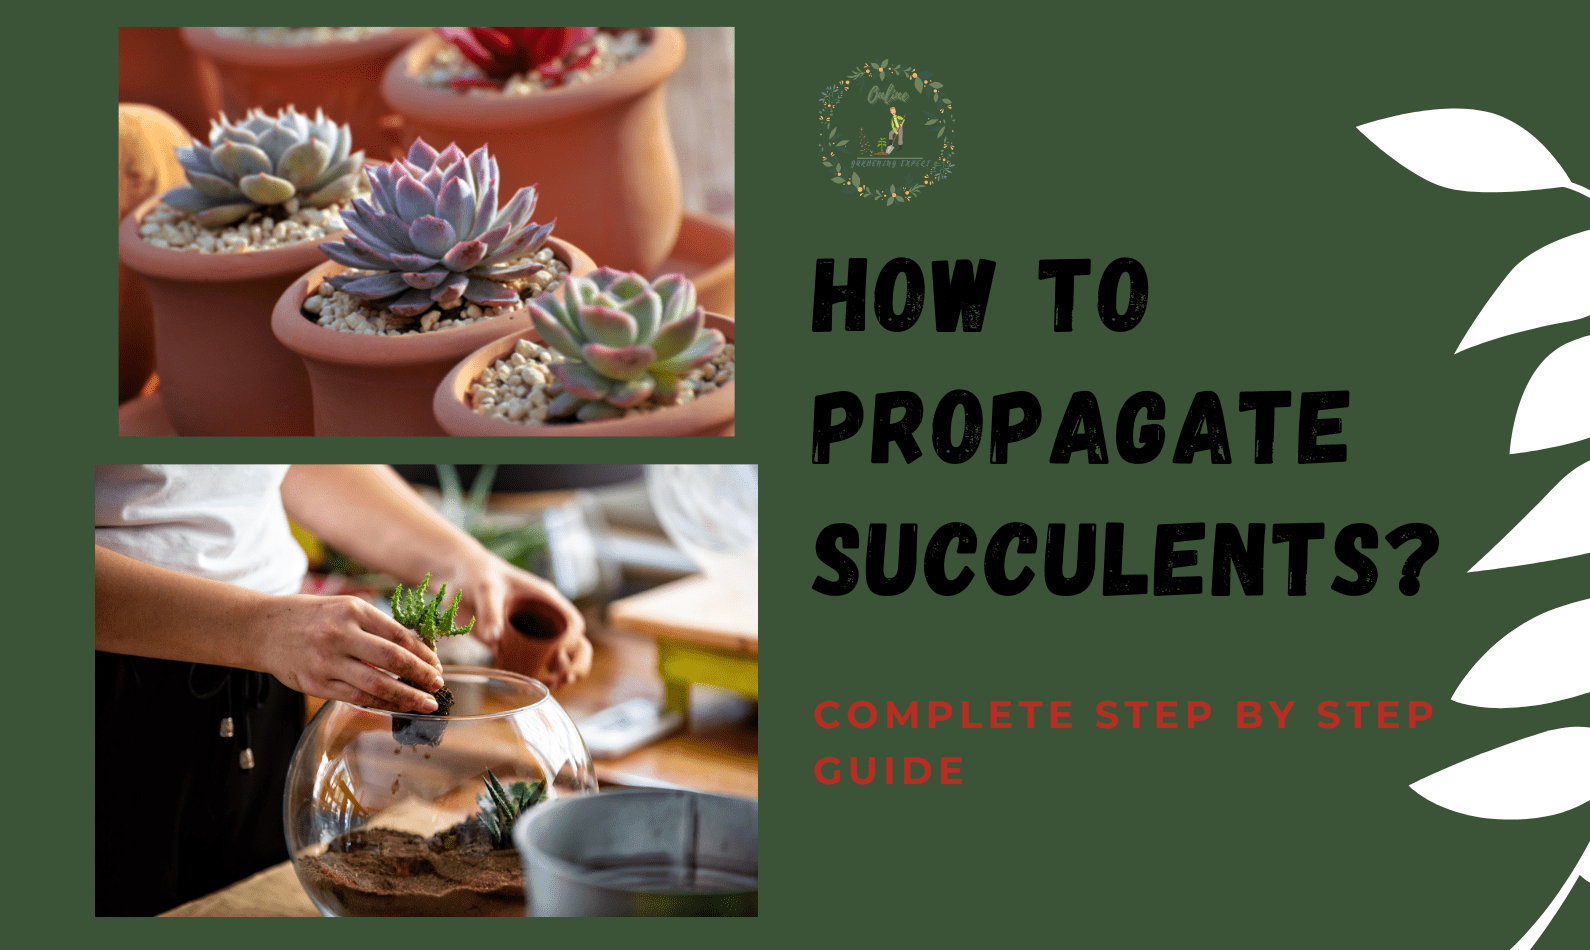 How to Propagate Succulents?